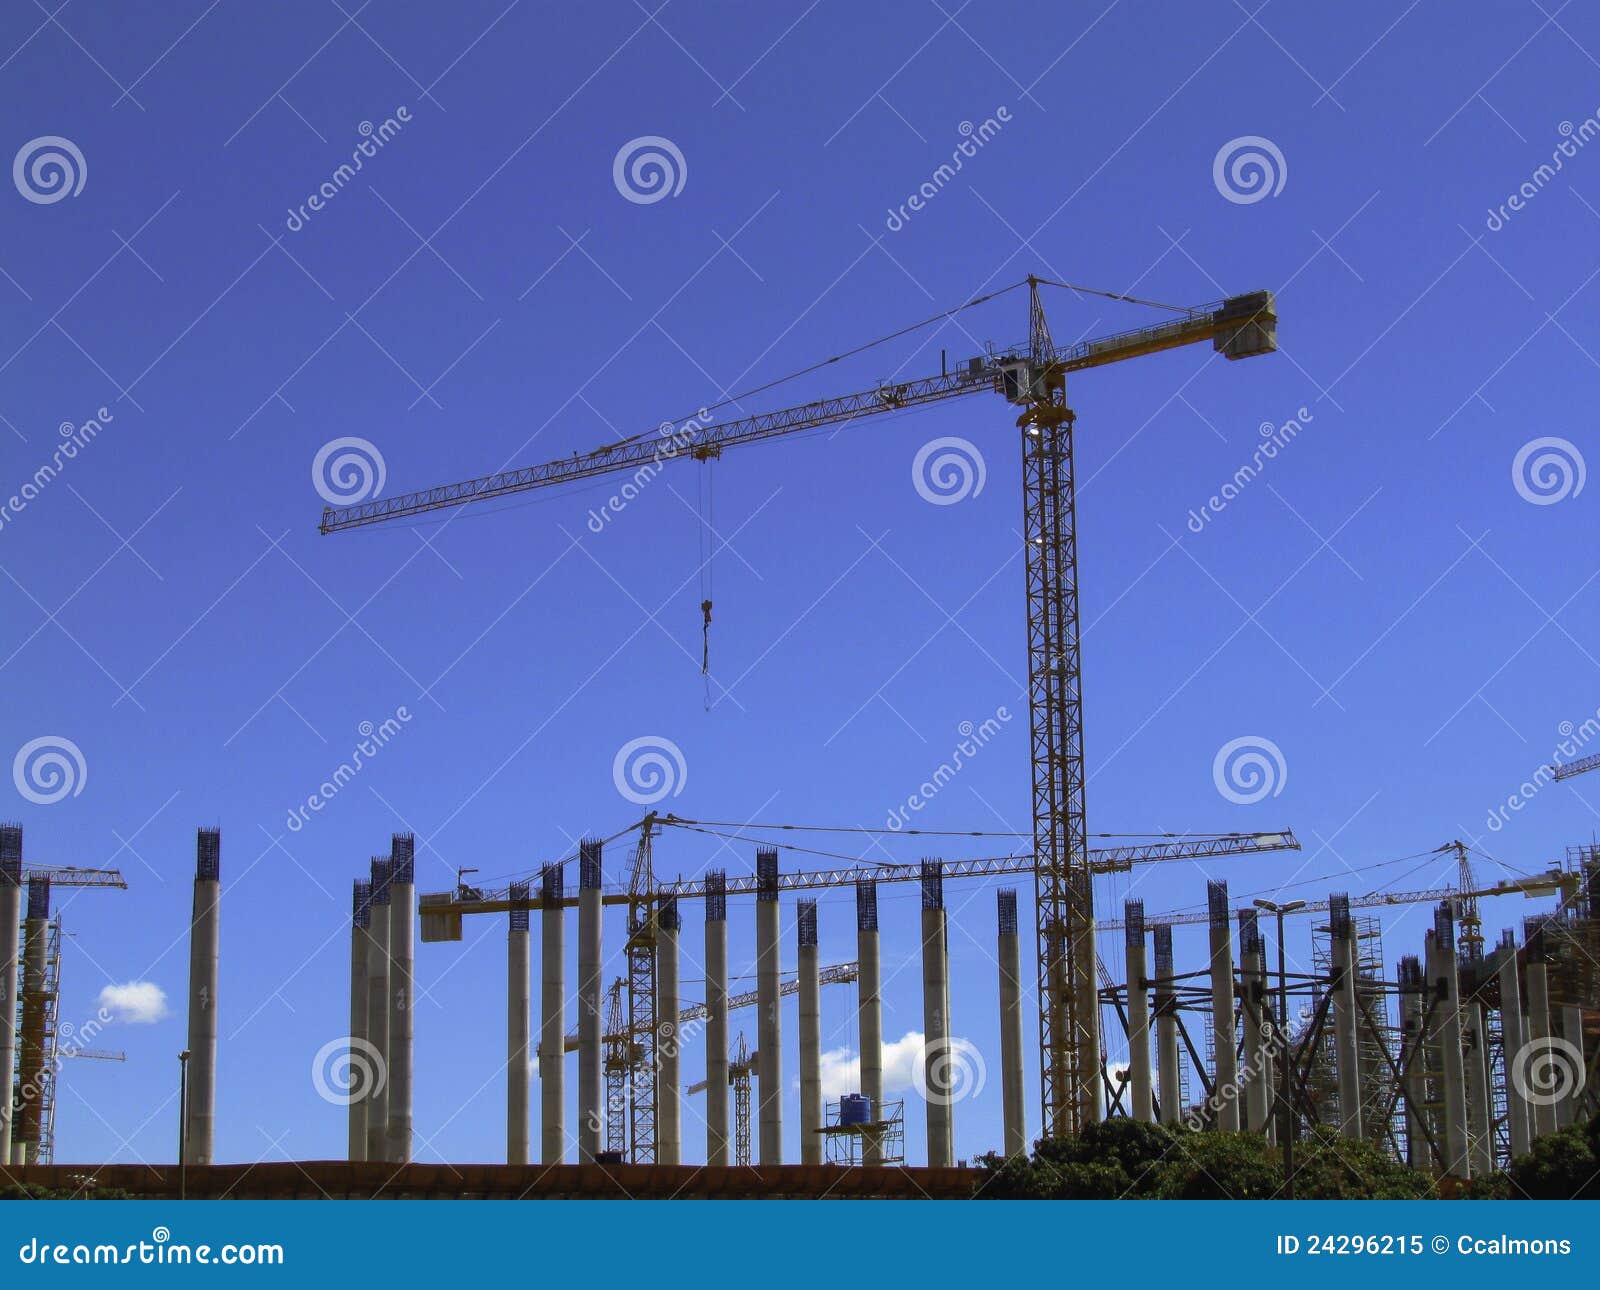 crane operating in a construction site.